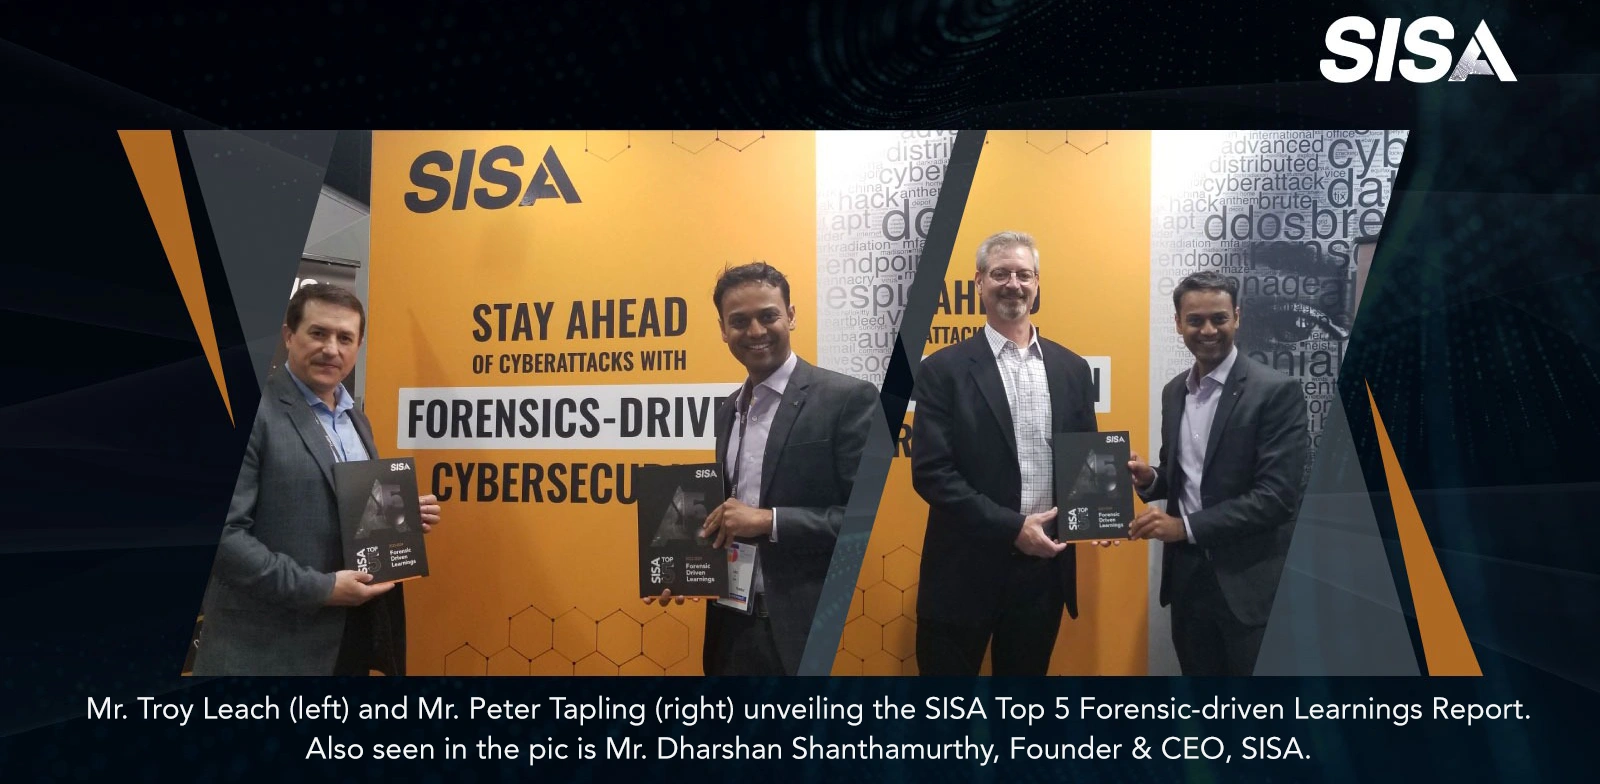 SISA Top 5 Forensic-driven learnings report launch at RSA Conference 2023